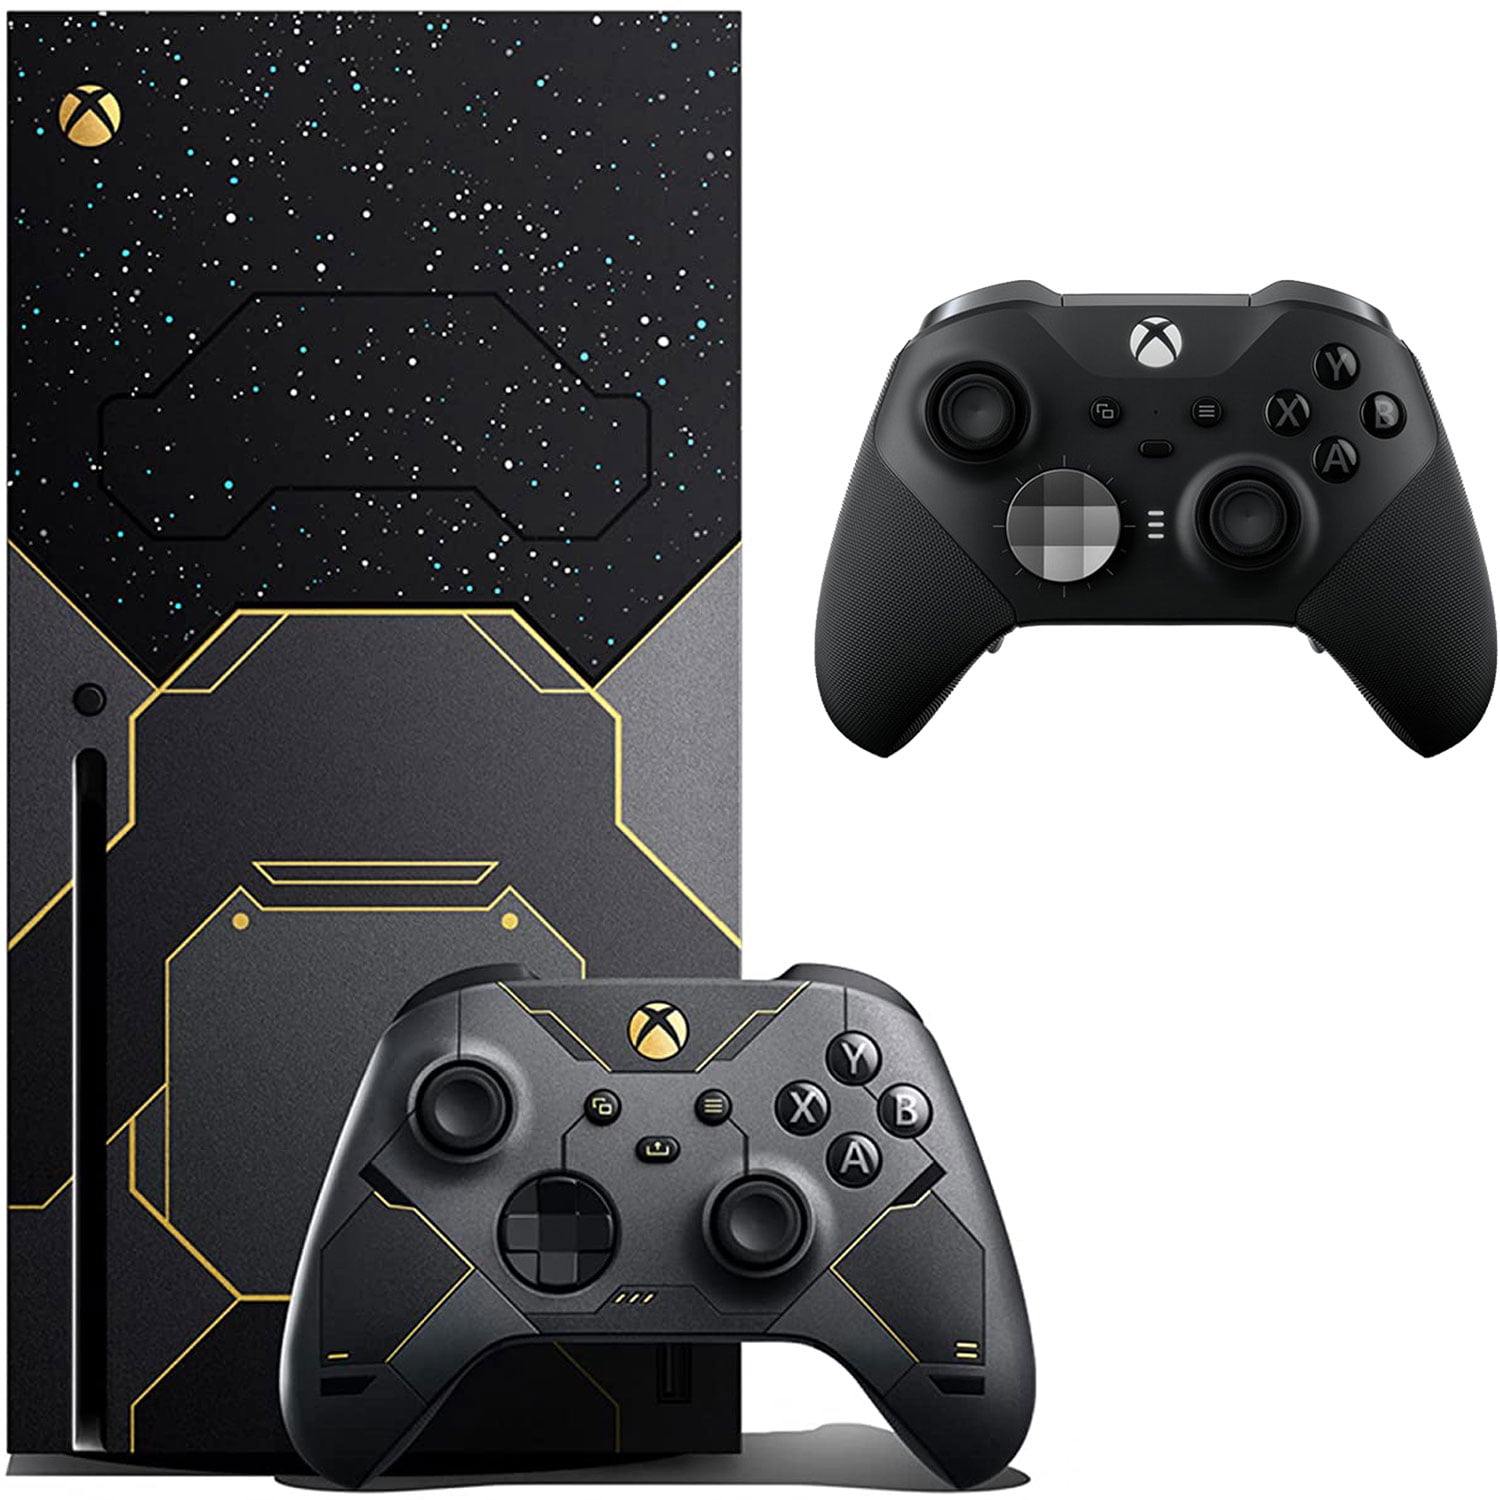  Halo Infinite Limited Edition Elite Series 2 Controller for  Series X